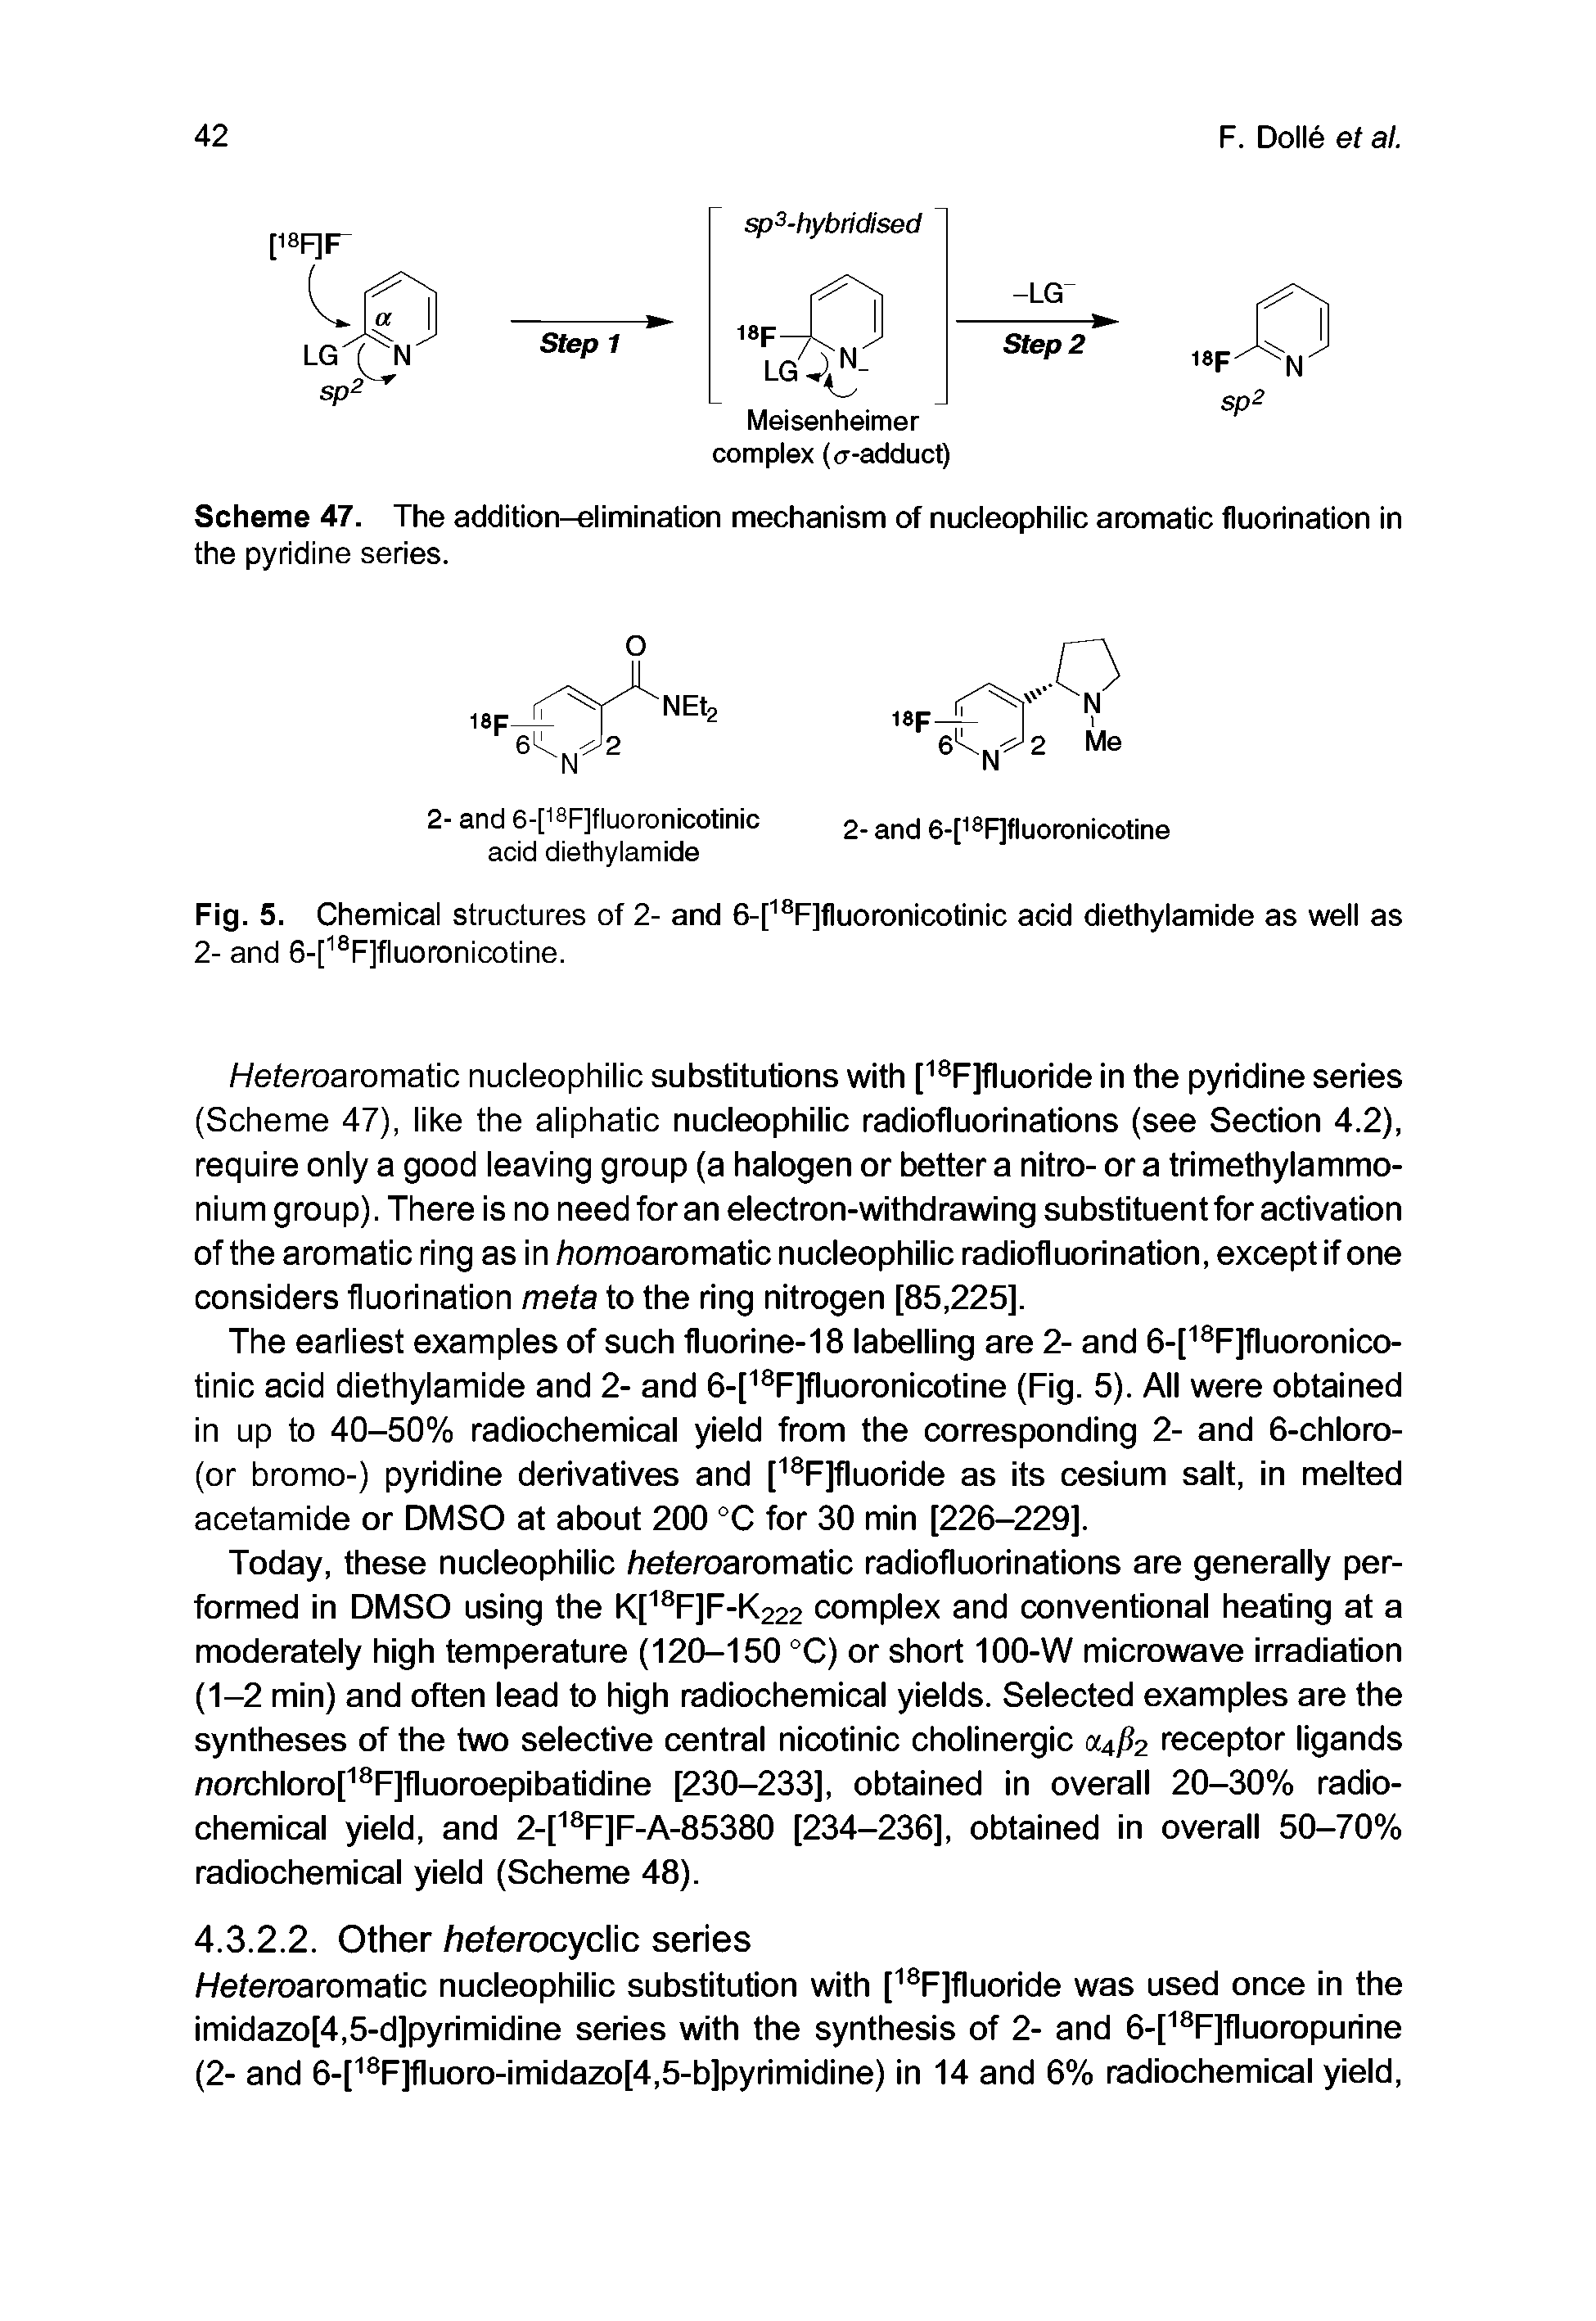 Scheme 47. The addition-elimination mechanism of nucleophilic aromatic fluorination in the pyridine series.